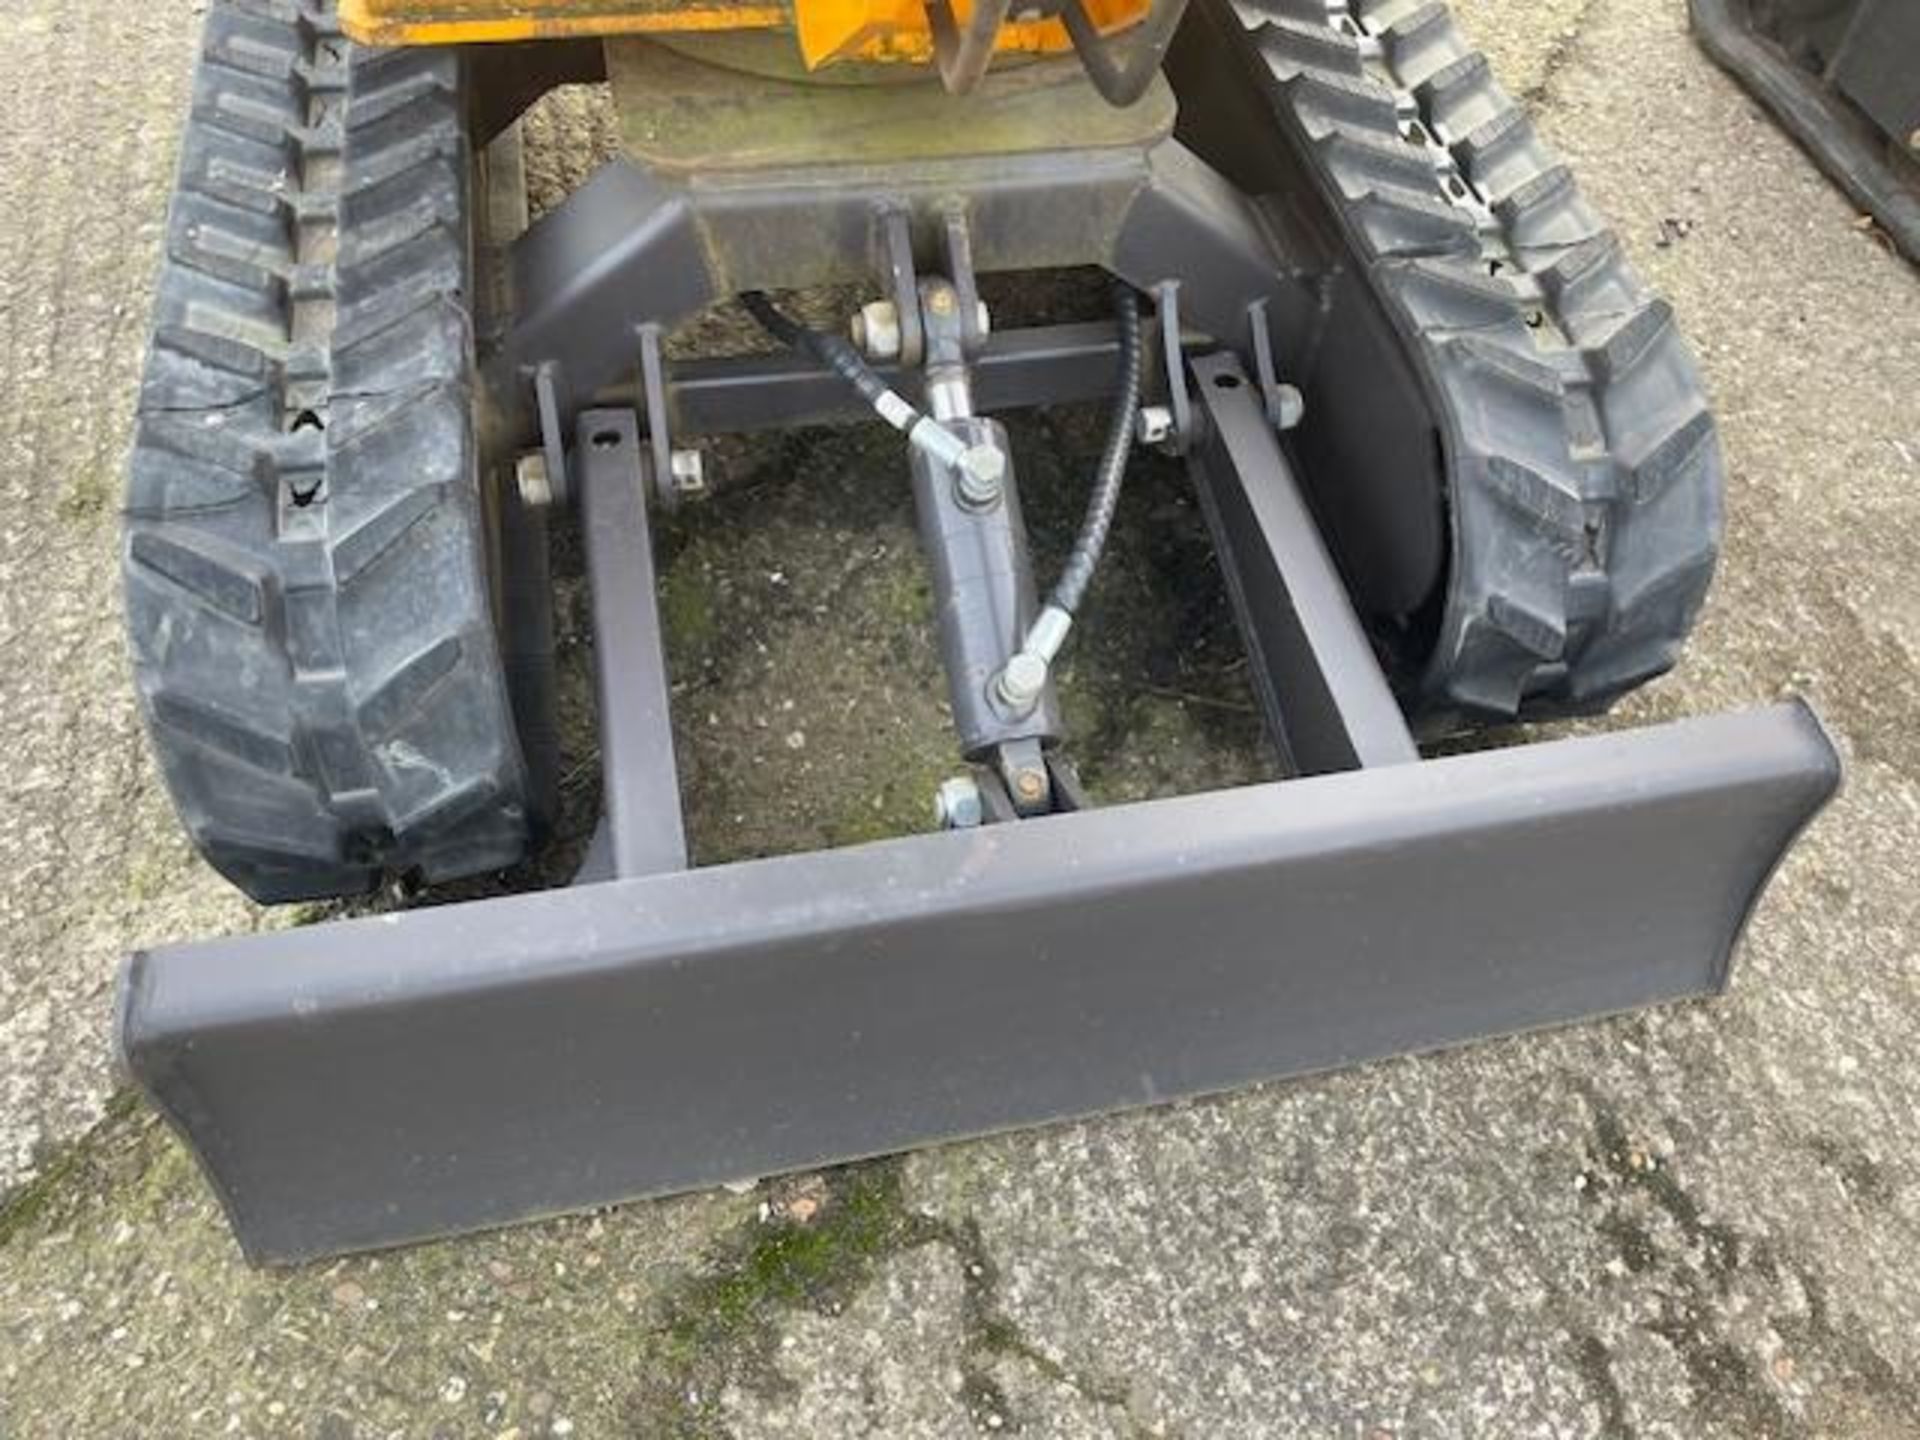 NEW UNISSUED XN10 RUBBER TRACKED MINI EXCAVATOR DIESEL ENGINE PIPED FOR HAMMER FRONT BLADE ETC - Image 8 of 8